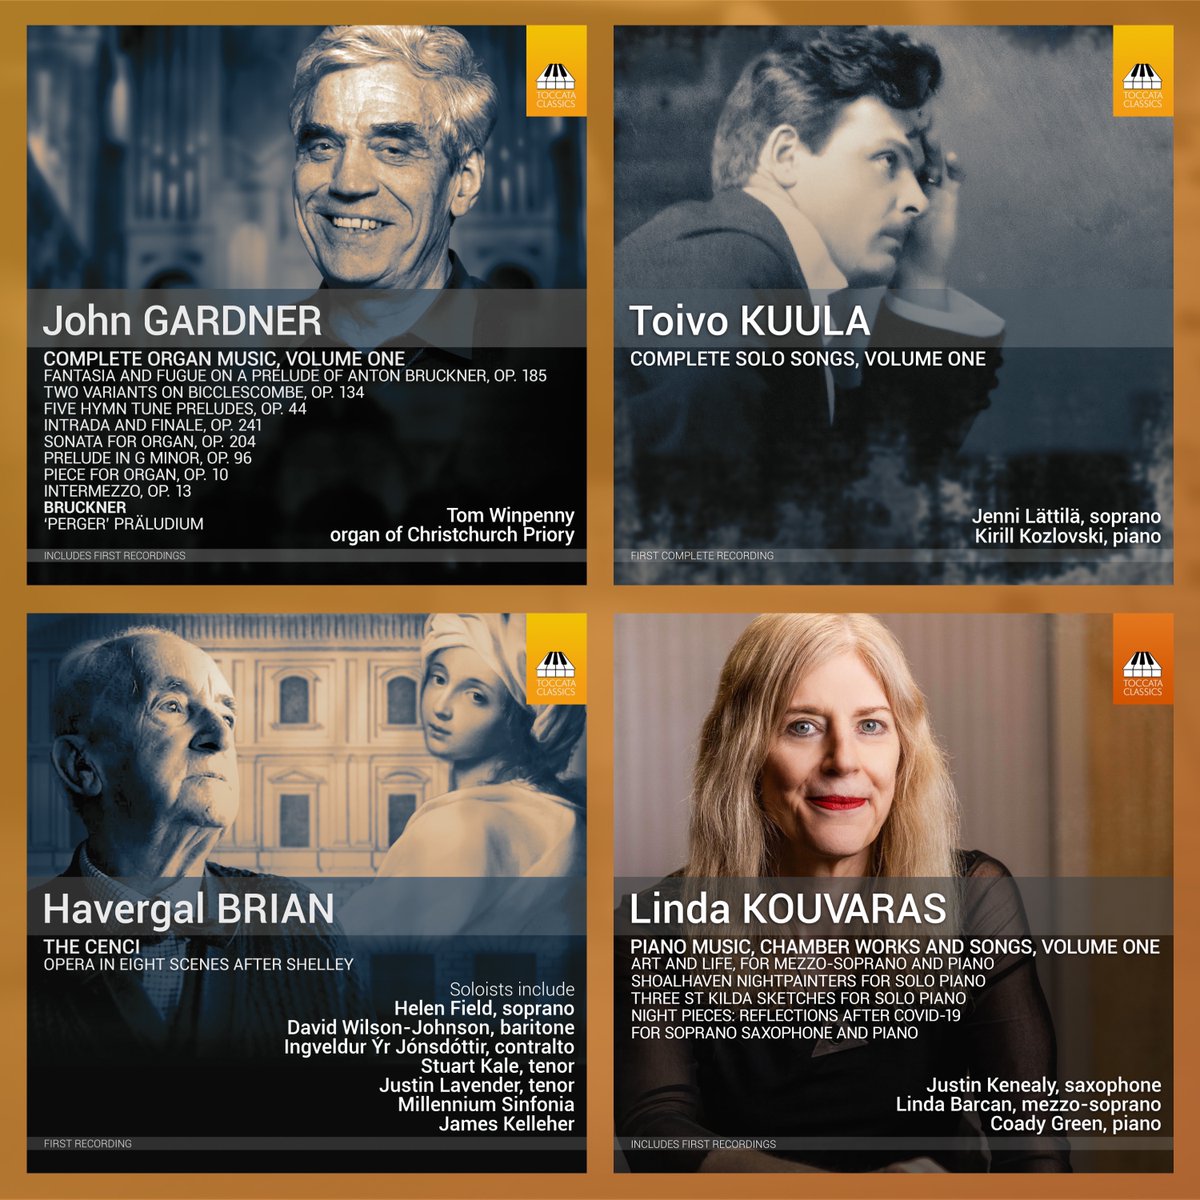 Next week brings the release of four unique releases of first recordings. Explore all four and save 💷 when you pre-order at toccataclassics.com/bundles